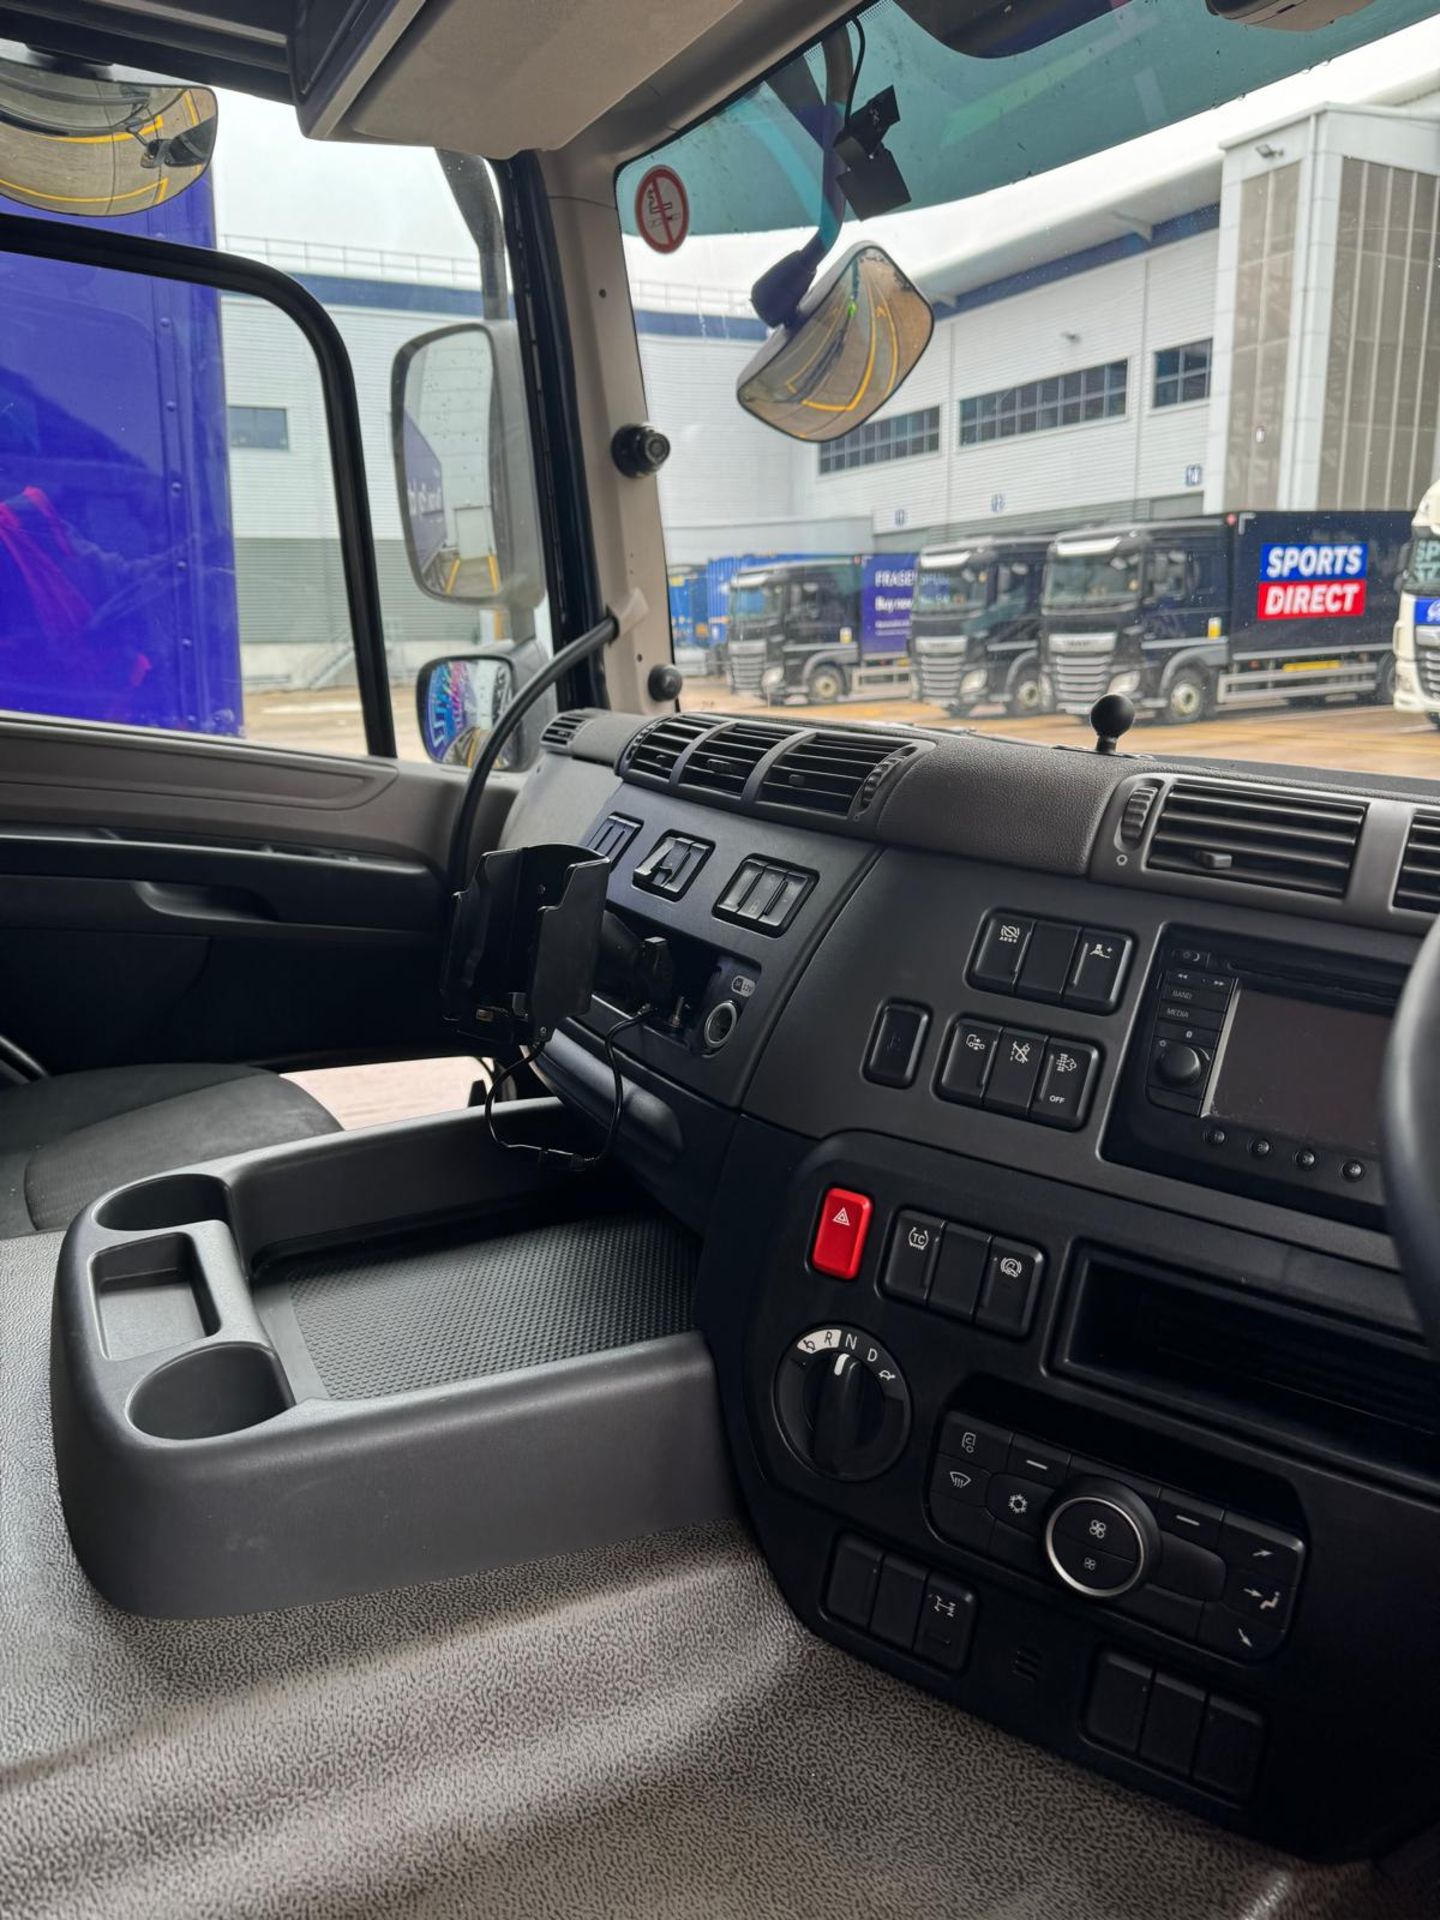 2019, DAF CF 260 FA (Ex-Fleet Owned & Maintained) - FN69 AXH (18 Ton Rigid Truck with Tail Lift) - Bild 10 aus 14